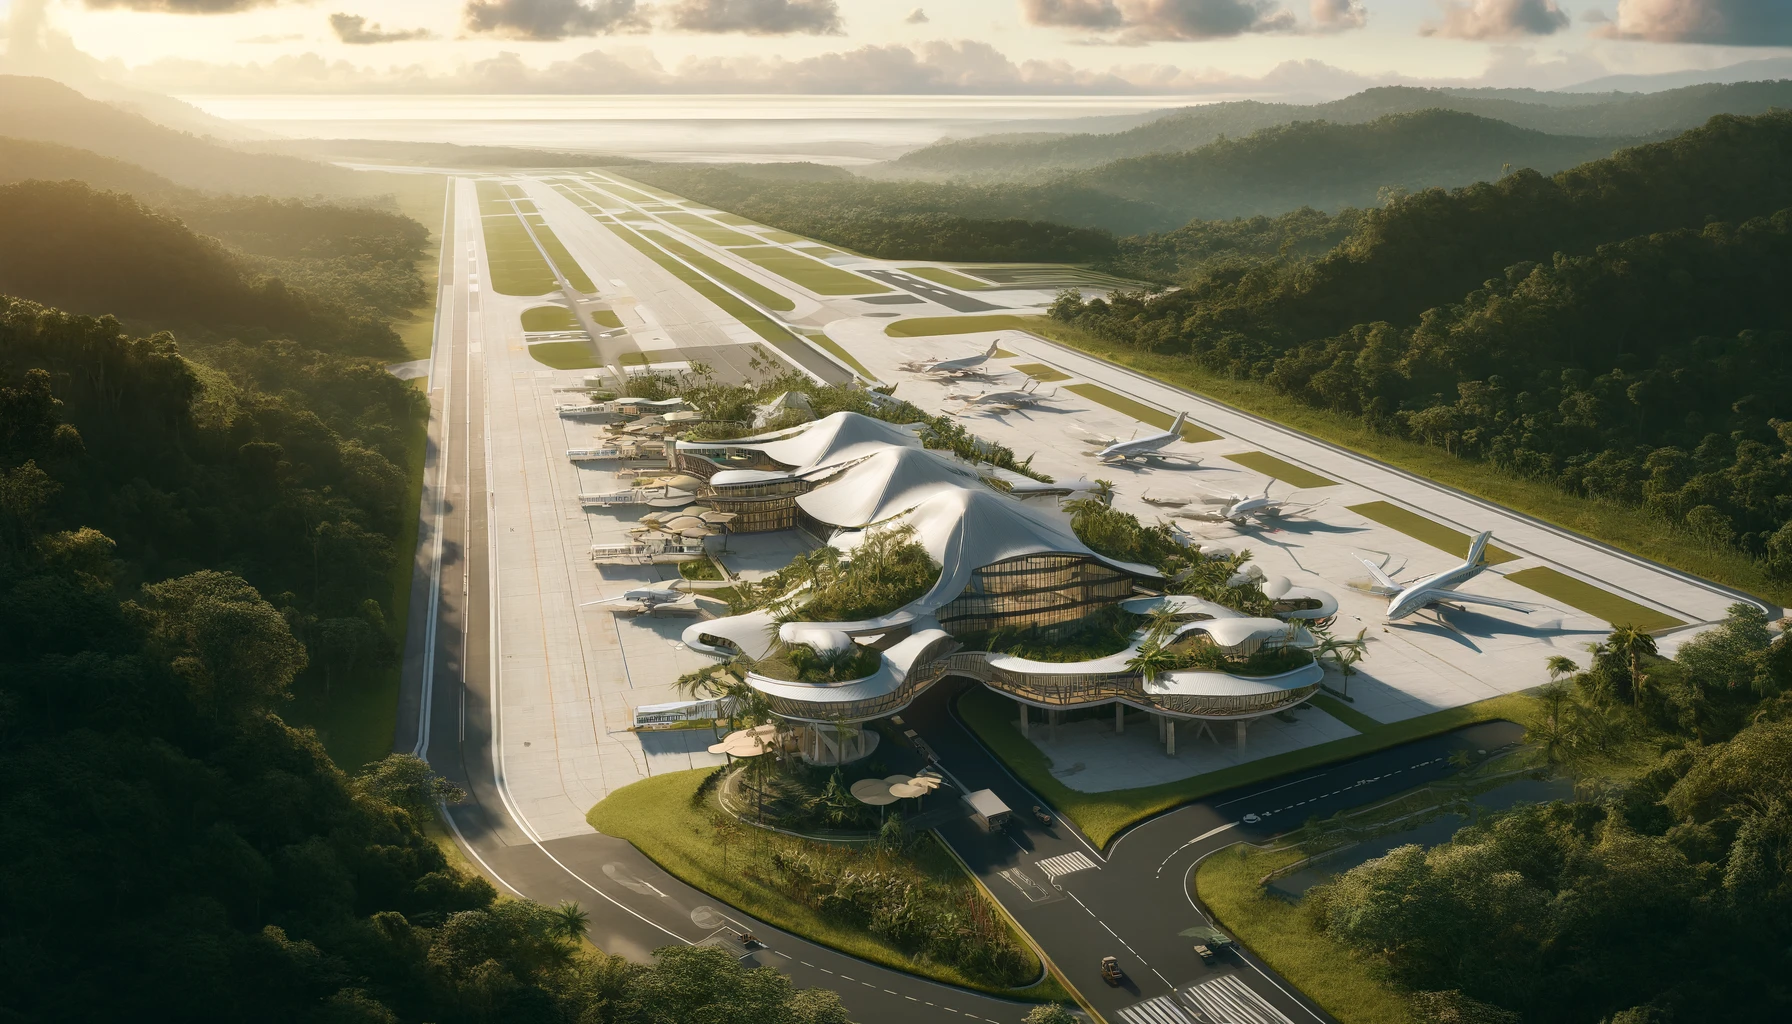 concept art of the proposed Brunca International Airport in Costa Rica's Osa region, featuring modern architecture with eco-friendly elements, surrounded by lush jungle and natural beauty.